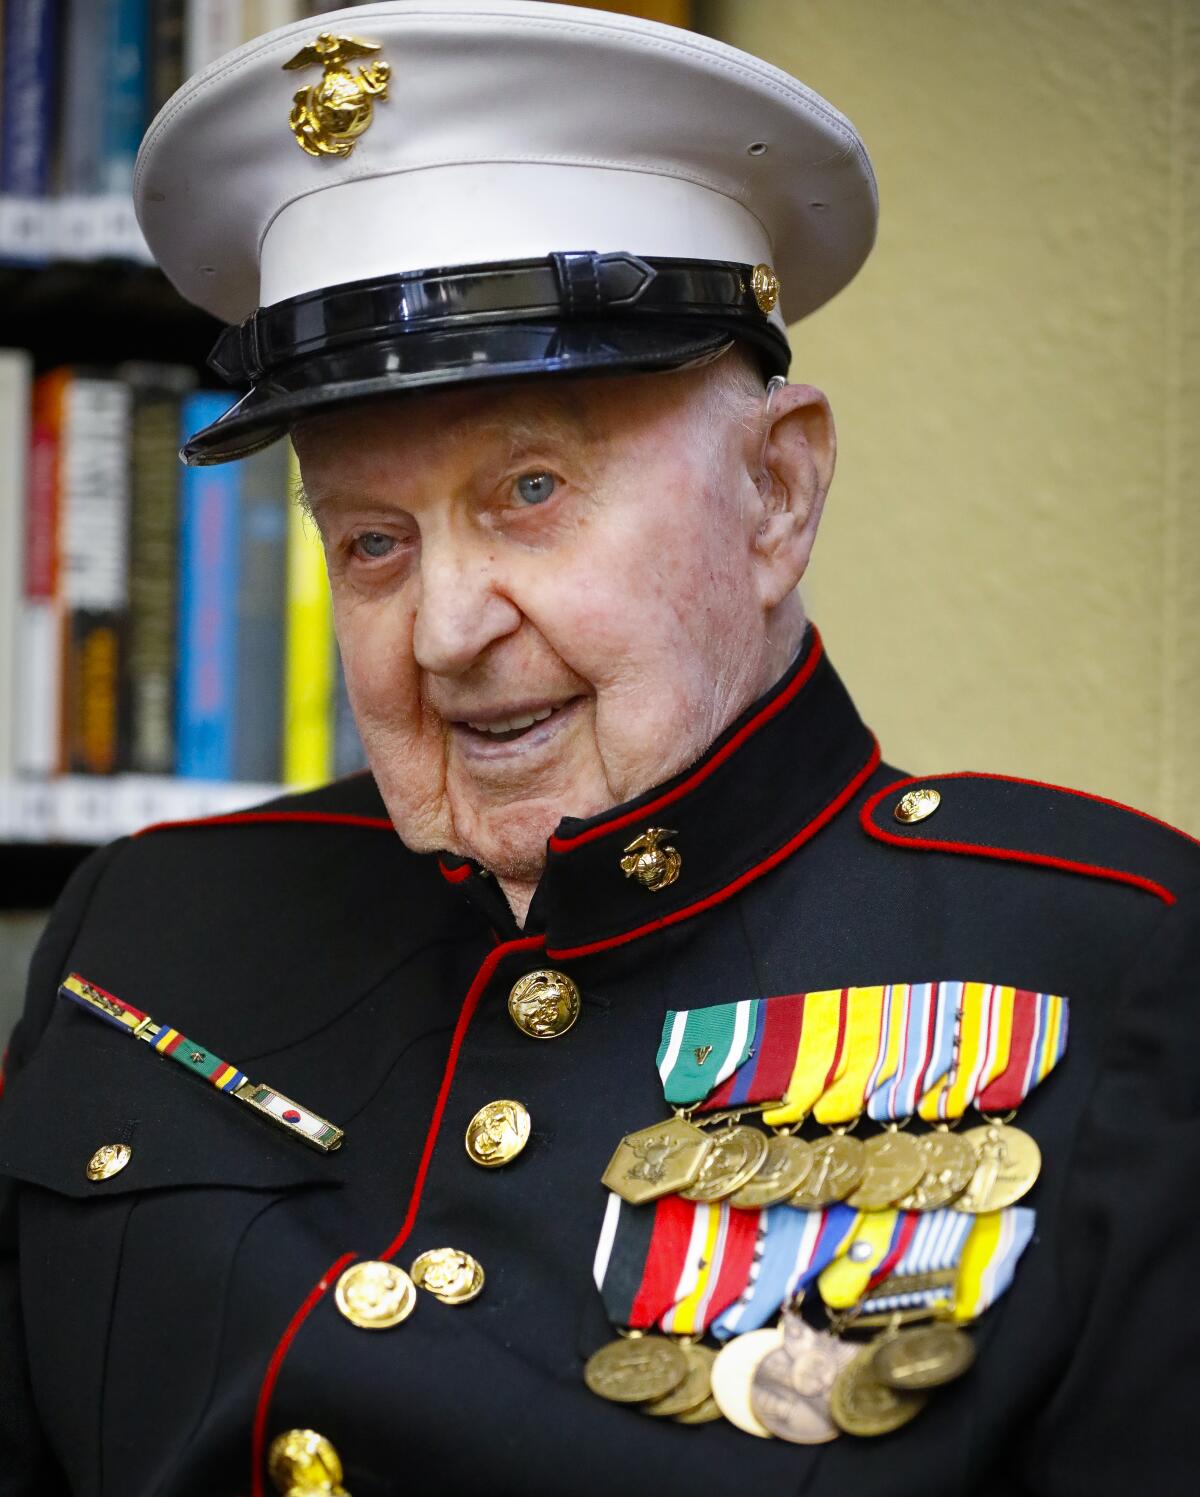 Retired U.S. Marine Corps First Sergeant John Farritor, a veteran of some of the biggest World War II battles in the Pacific, and the Korean War, wore his dress uniform to the party celebrating his 100th birthday, July 9, 2019, at Pacifica Senior Living, in Vista, California where he lives.